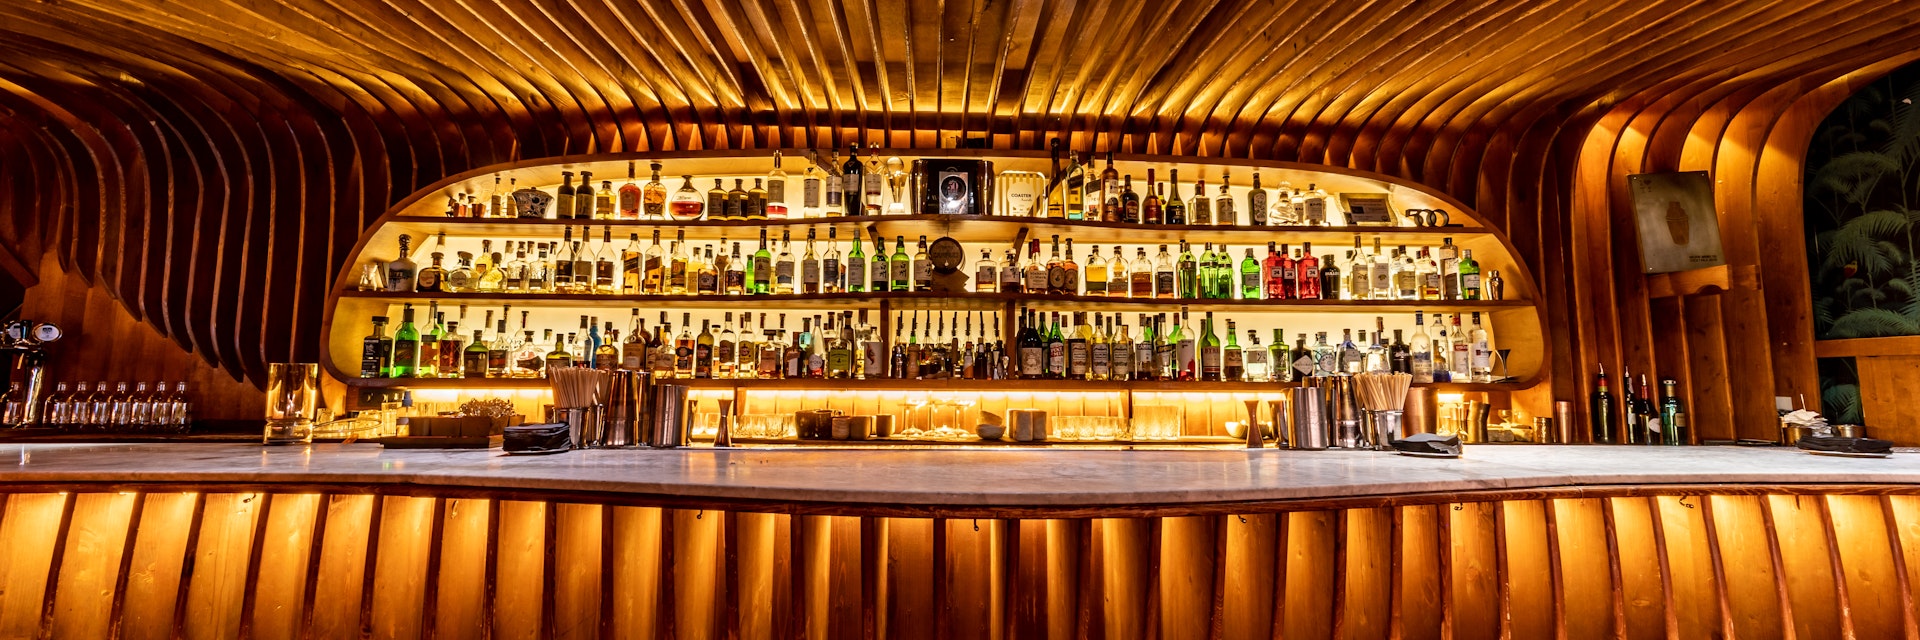 Paradiso is a dramatic, dimly lit haunt offering imaginative cocktails & classic bar bites, plus mixology classes. Ranked one of the best bars int he world.